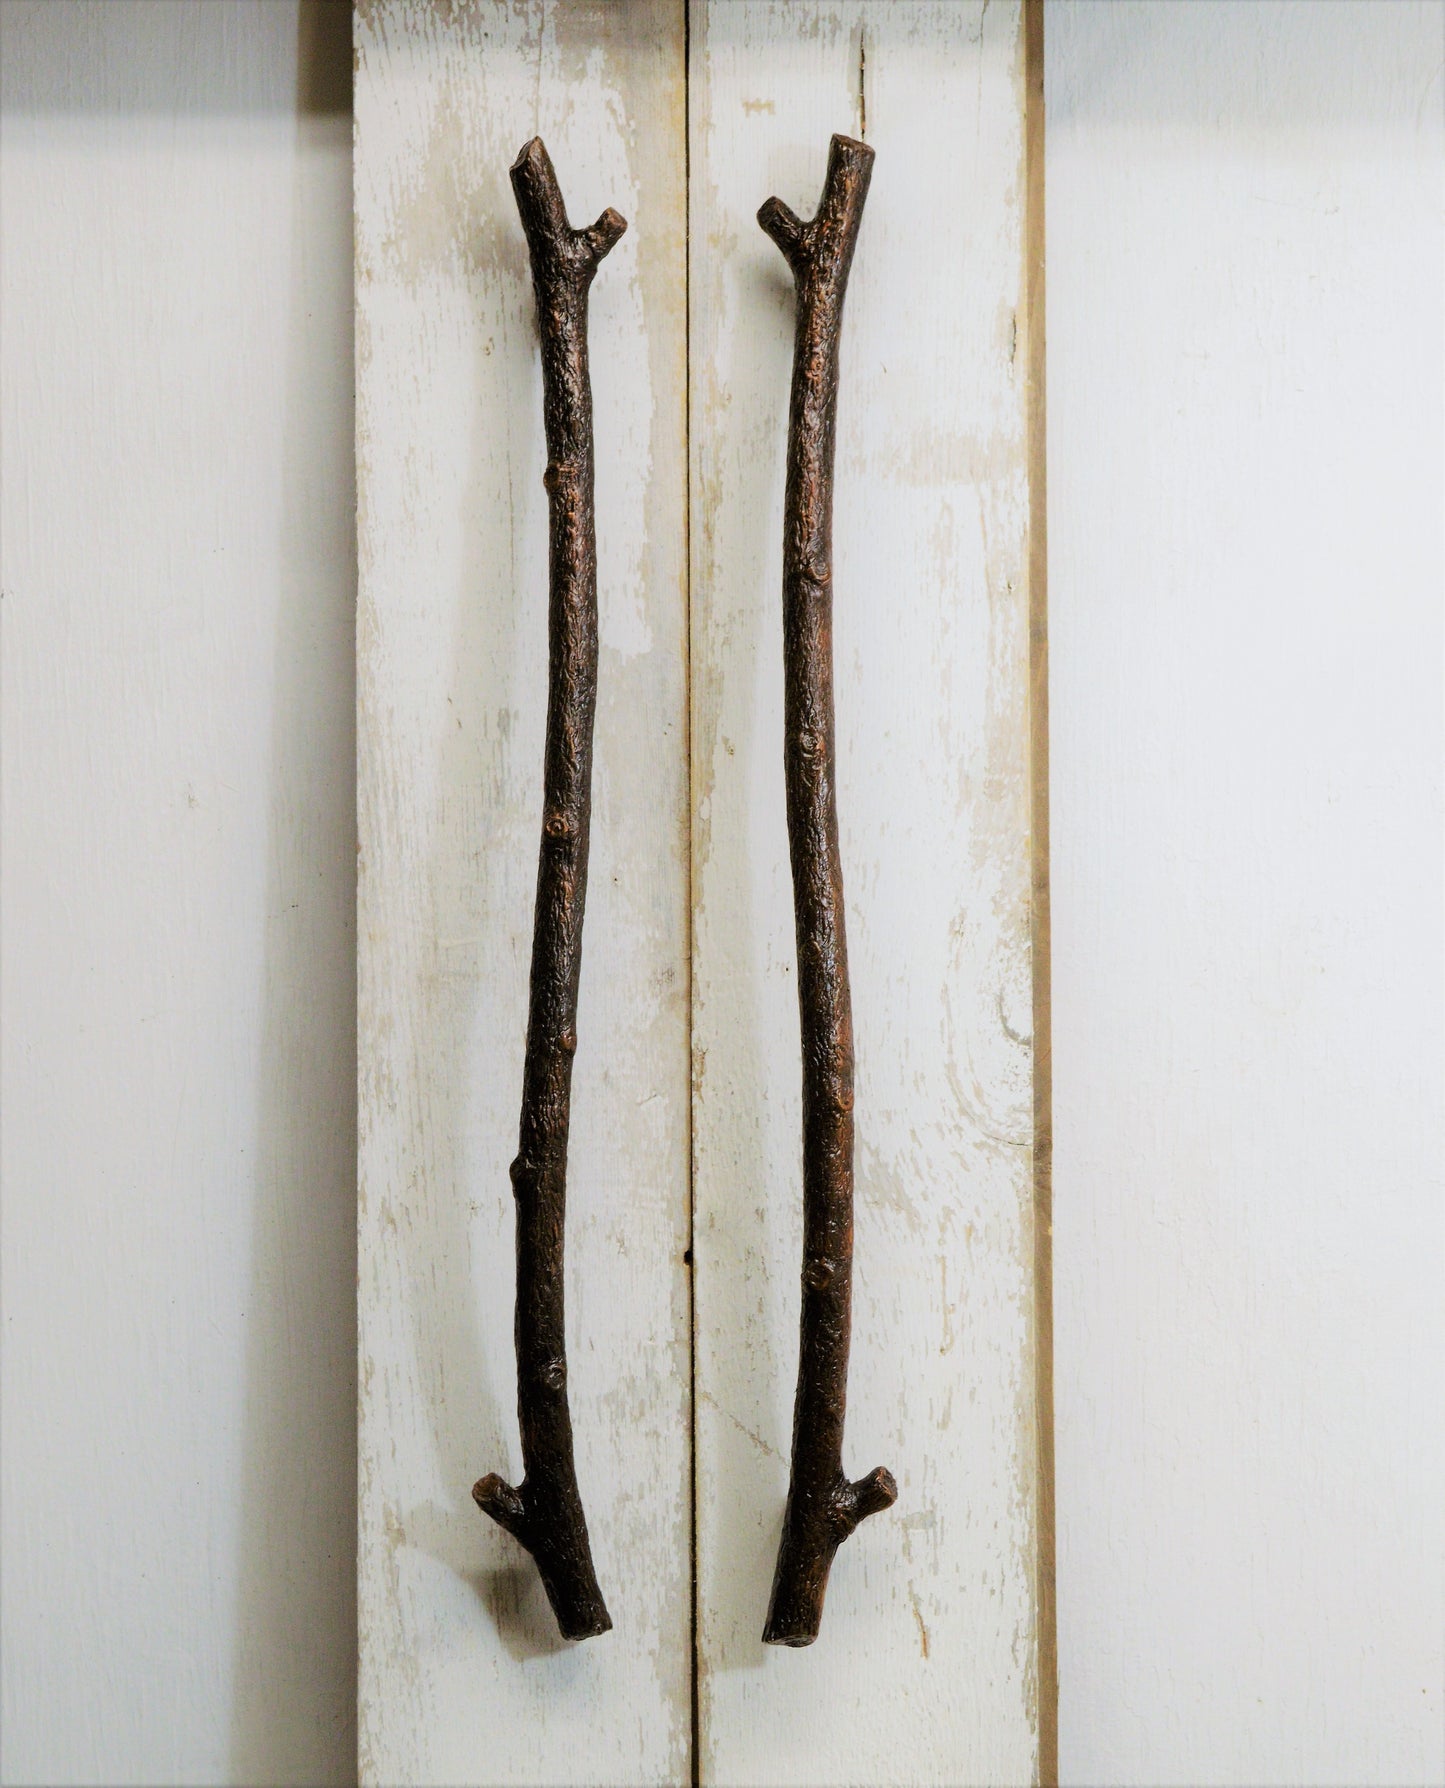 Willow branch refirgeraor or appliance handles made from bronze